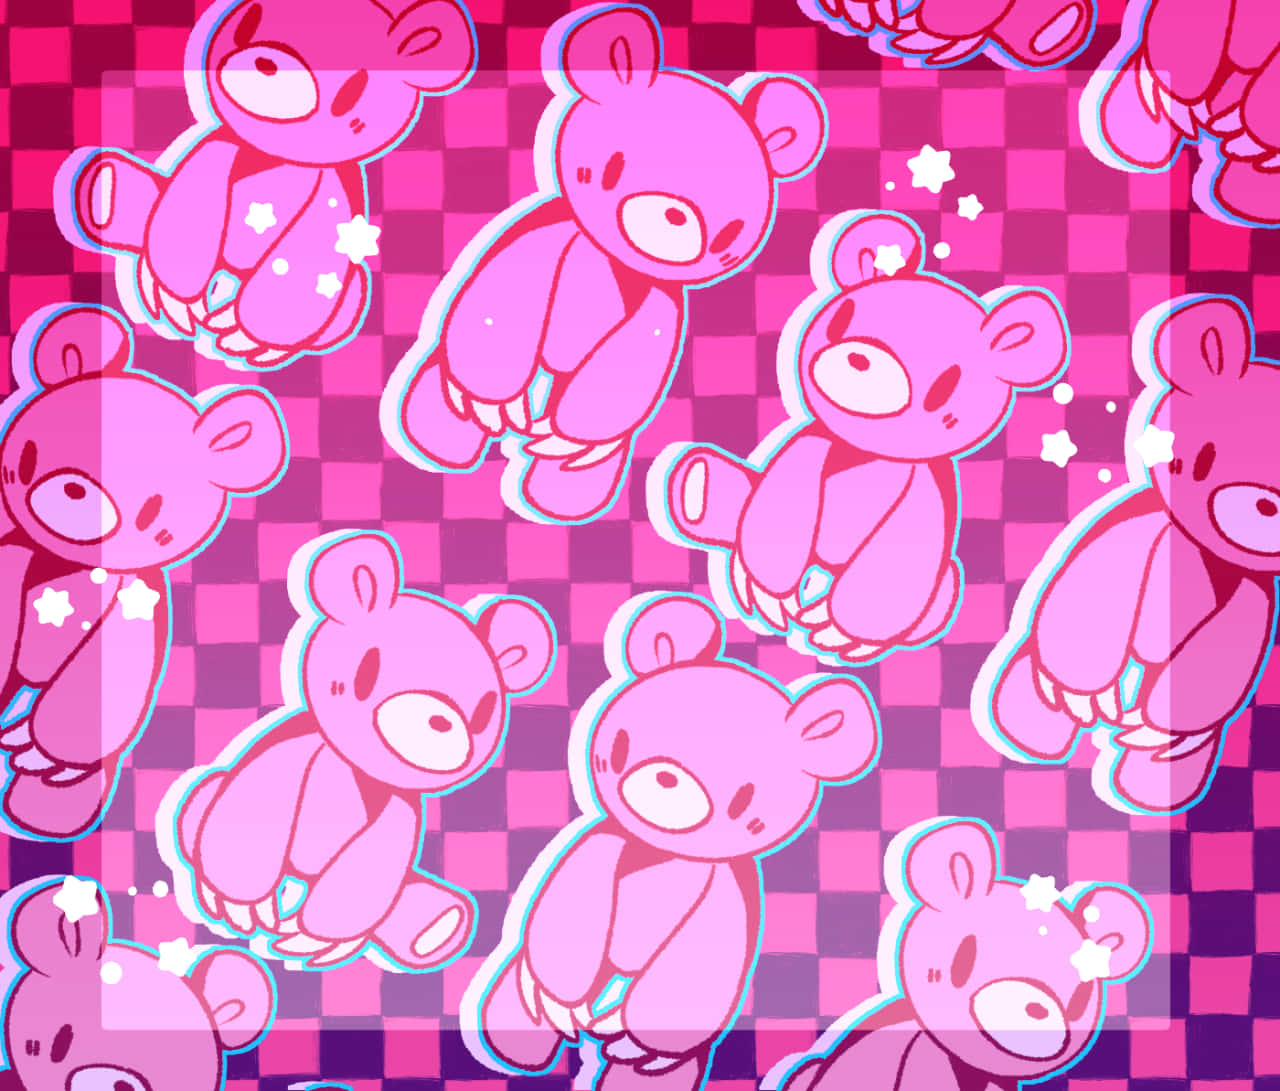 Gloomy Bear With Racing Patterns Wallpaper